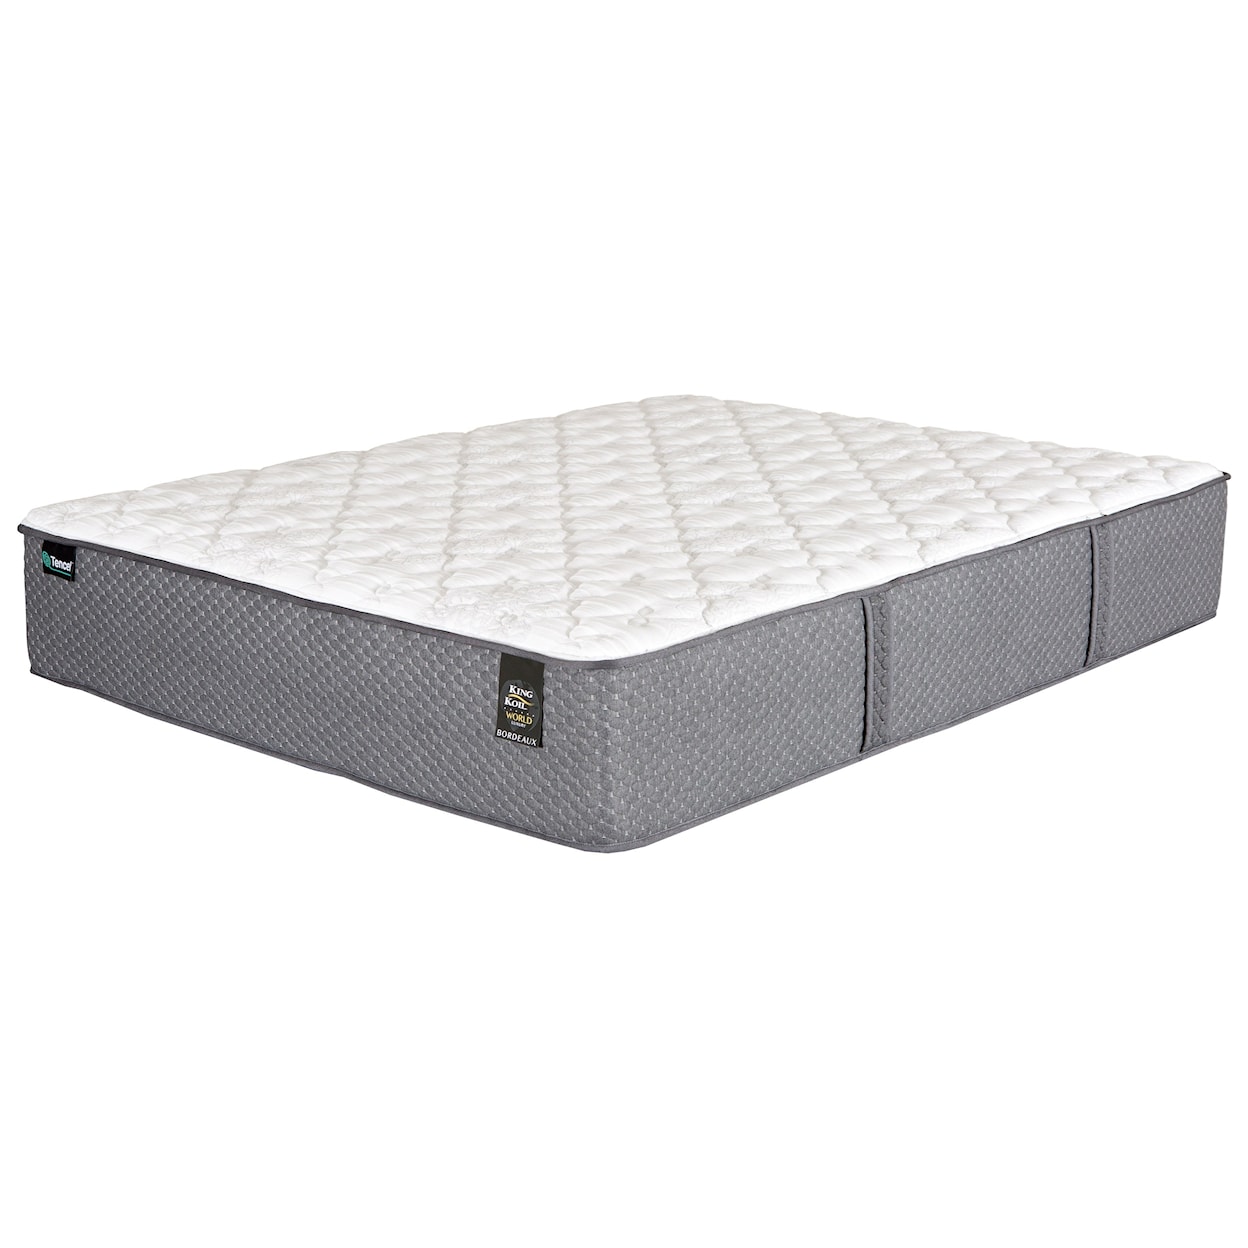 King Koil Beaumont EF King Pocketed Coil Mattress Set